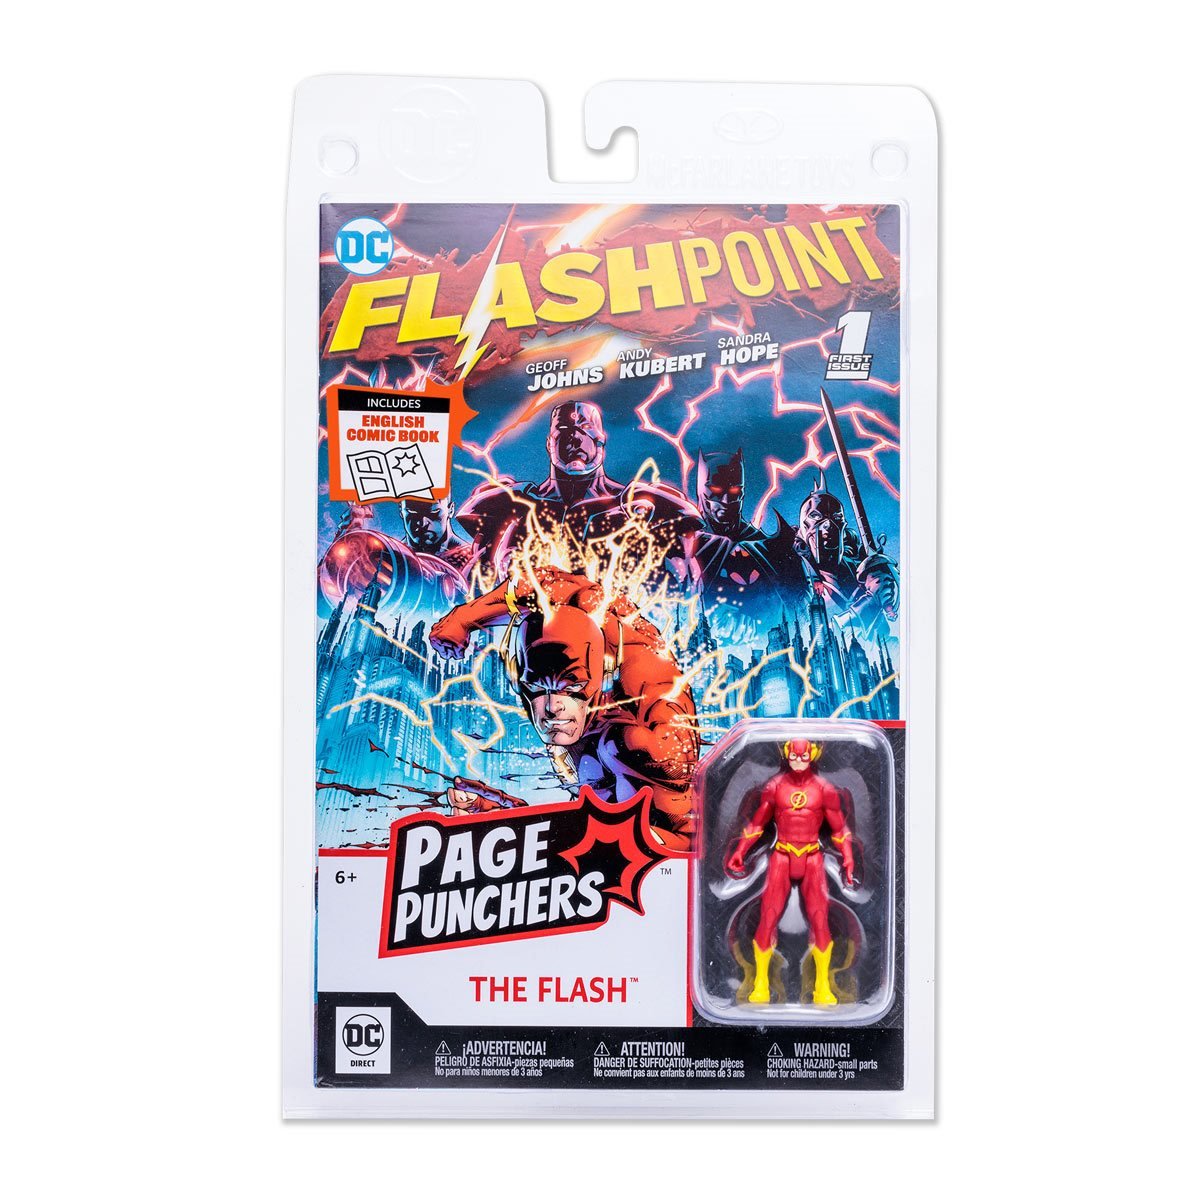 Flashpoint The Flash Punchers 3-Inch Scale Action Figure with Flashpoint Comic Book